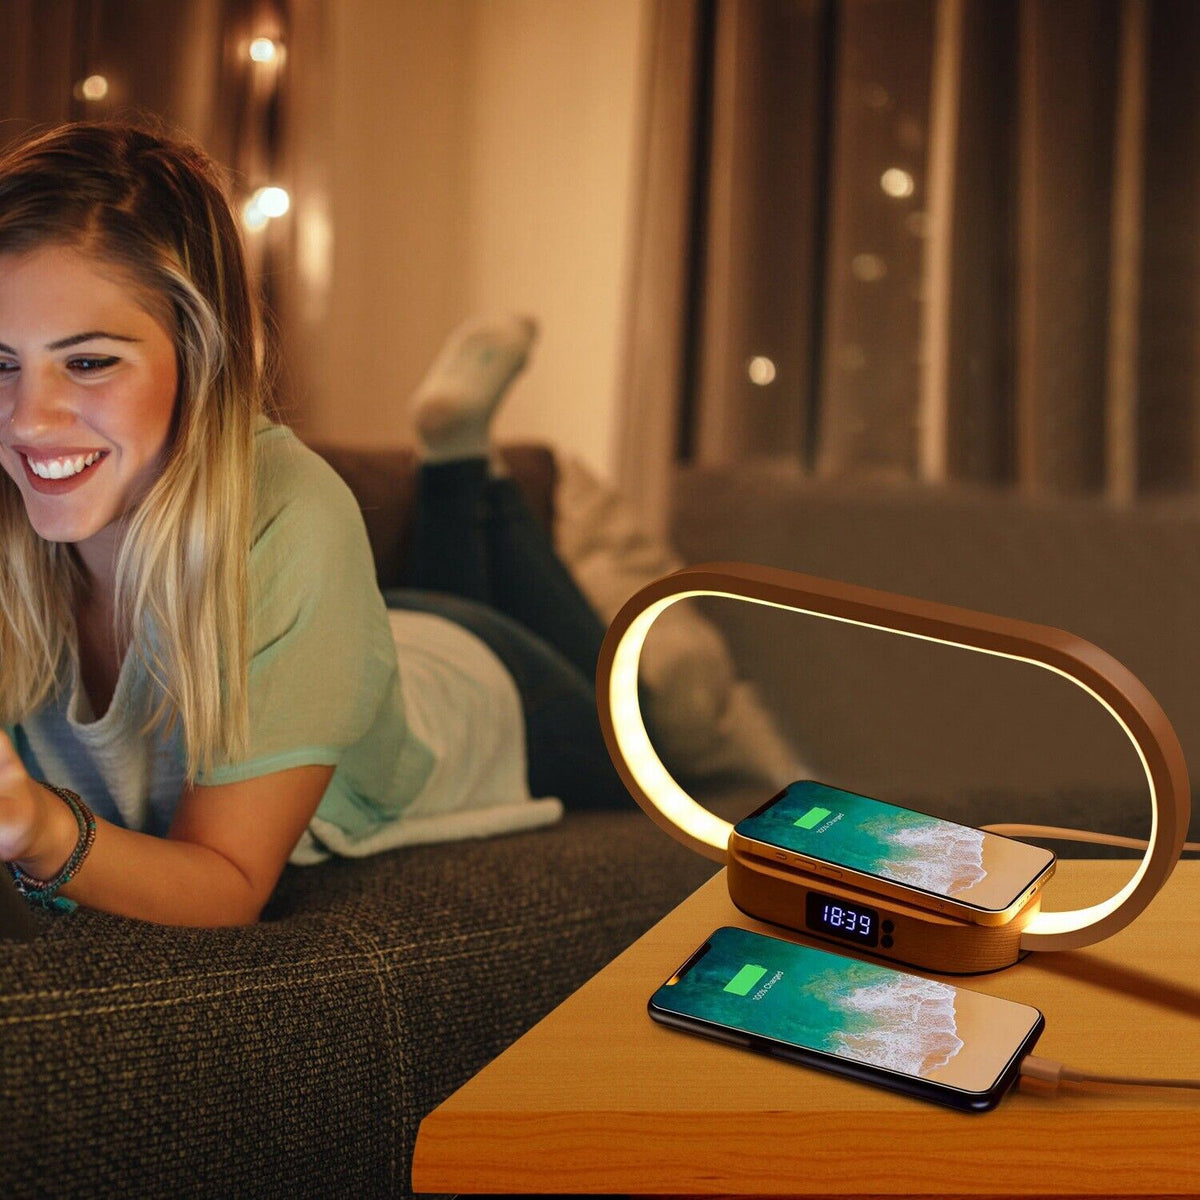 LED Bedside Lamp and Clock with USB Wireless Charger and Touch Control